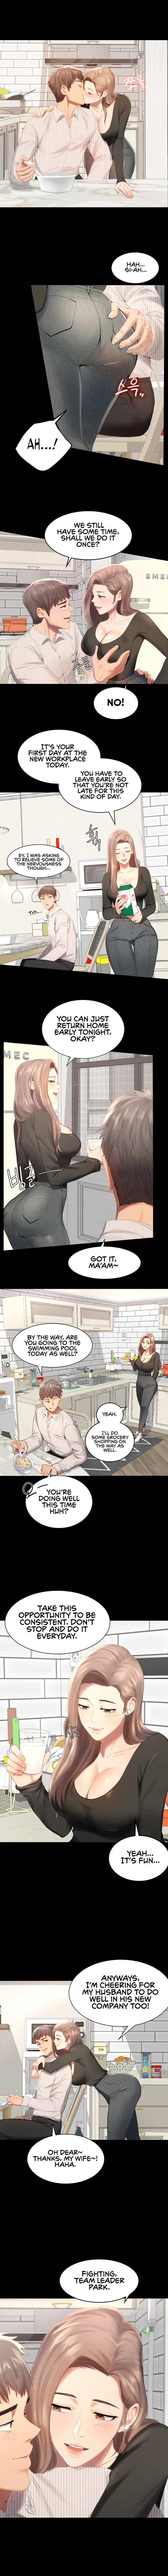 Illicit Love - Chapter 1 Page 3